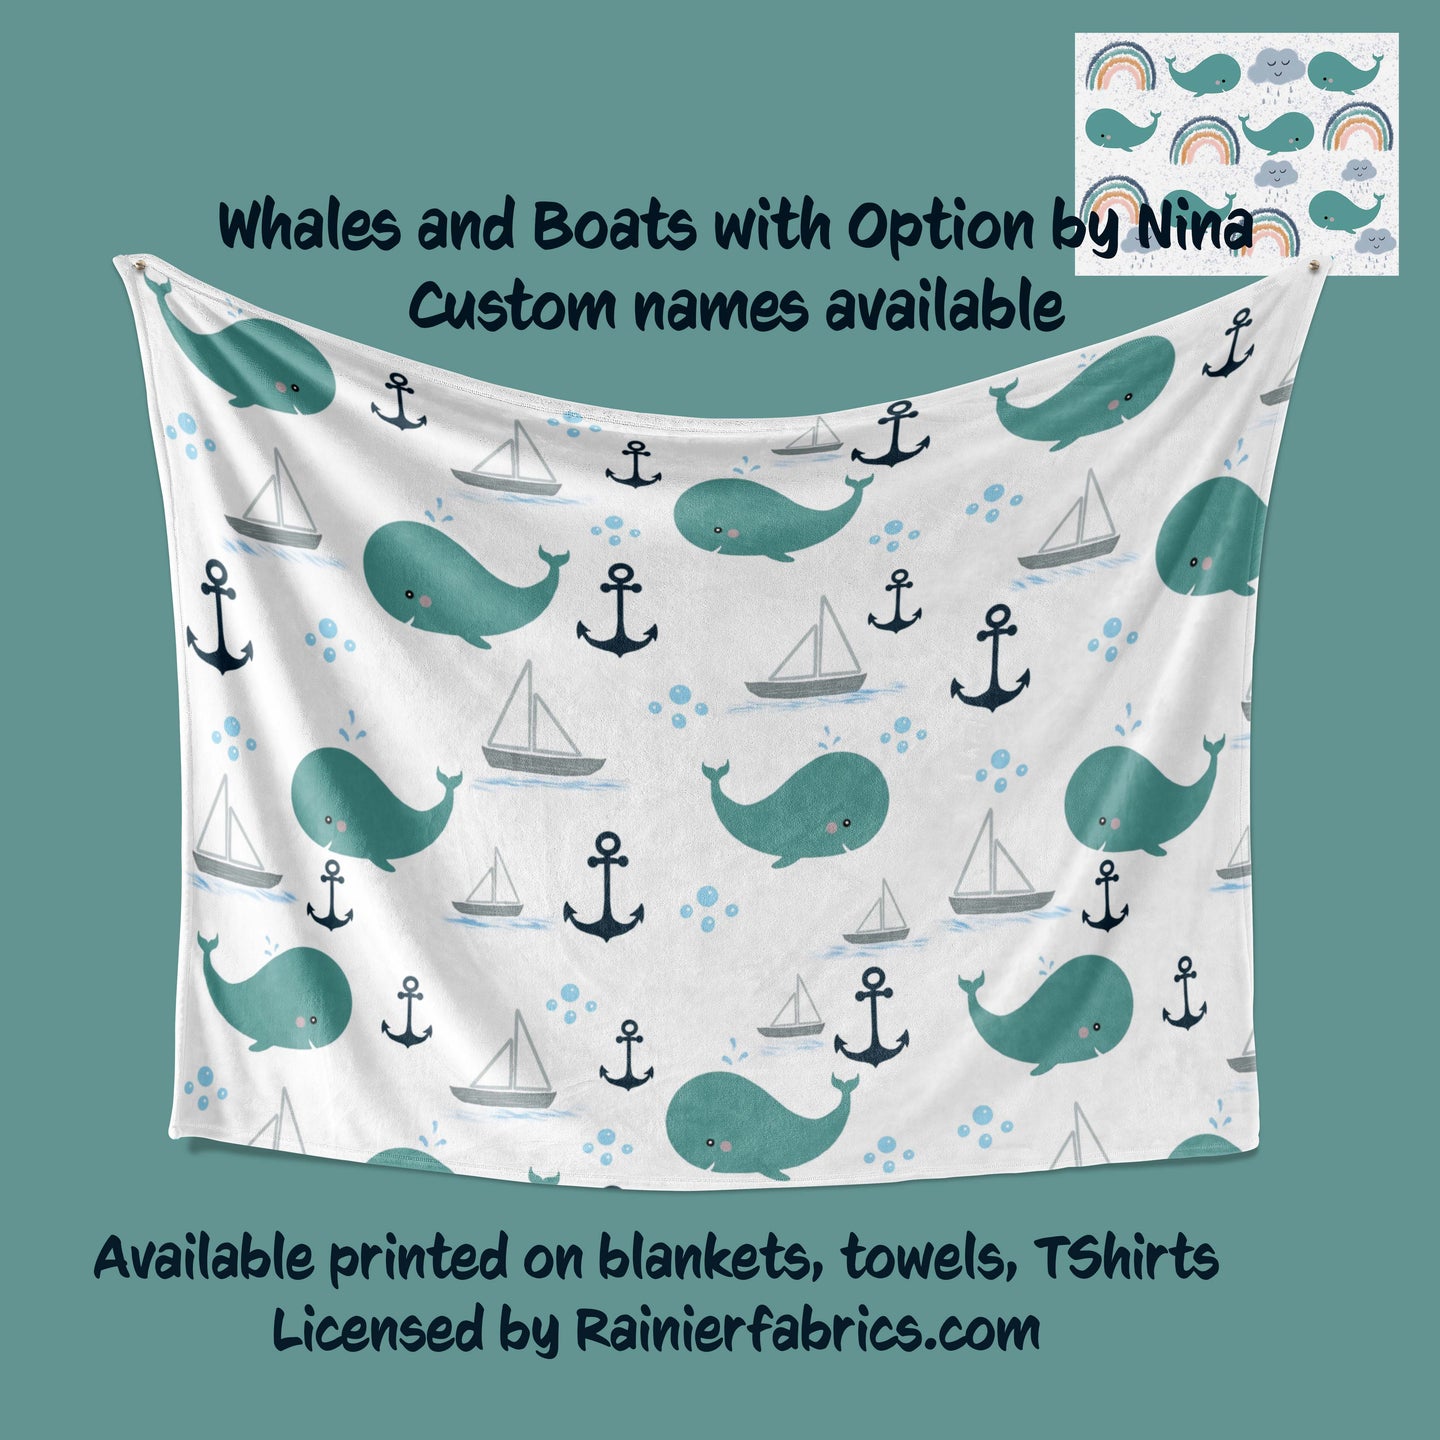 Whales and Boats by Nina - Blanket